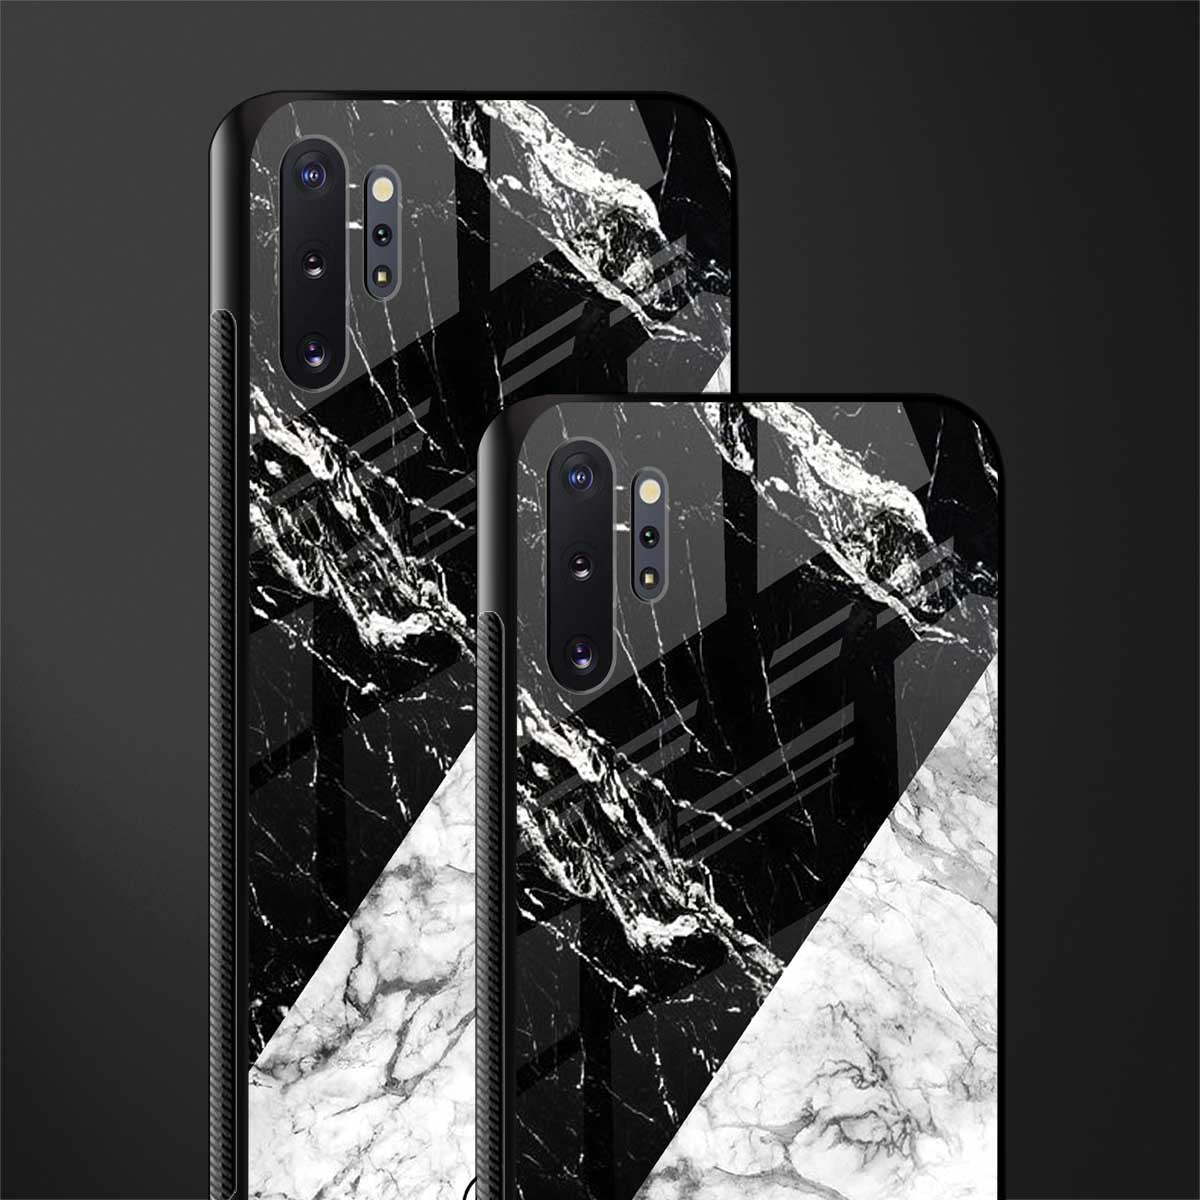 fatal contradiction phone cover for samsung galaxy note 10 plus